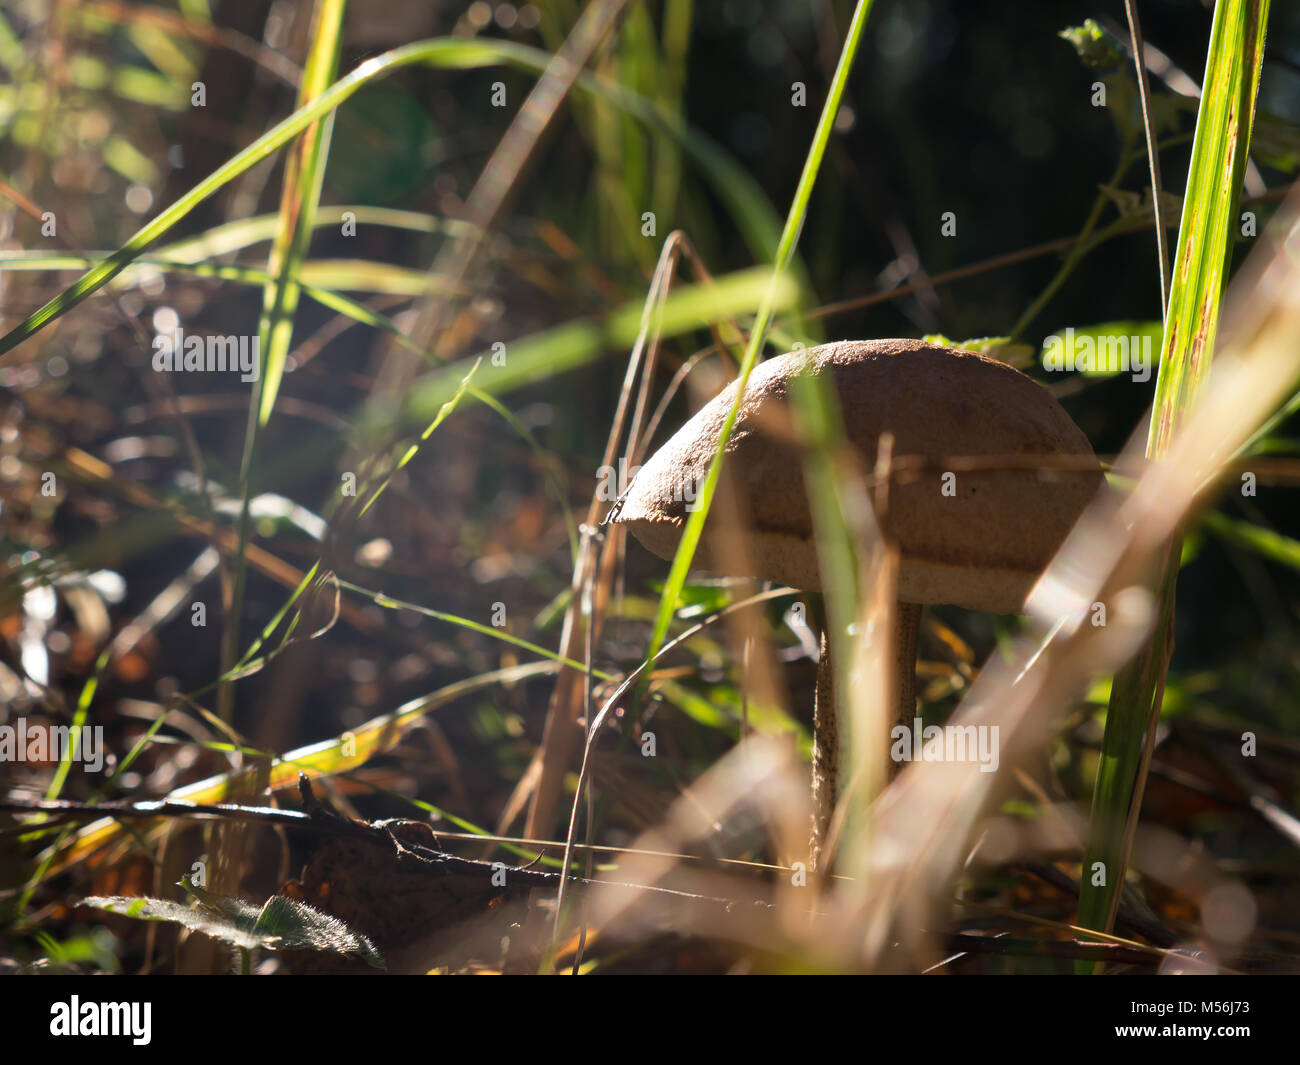 The nature vegetable mushroom on a forest background. Stock Photo